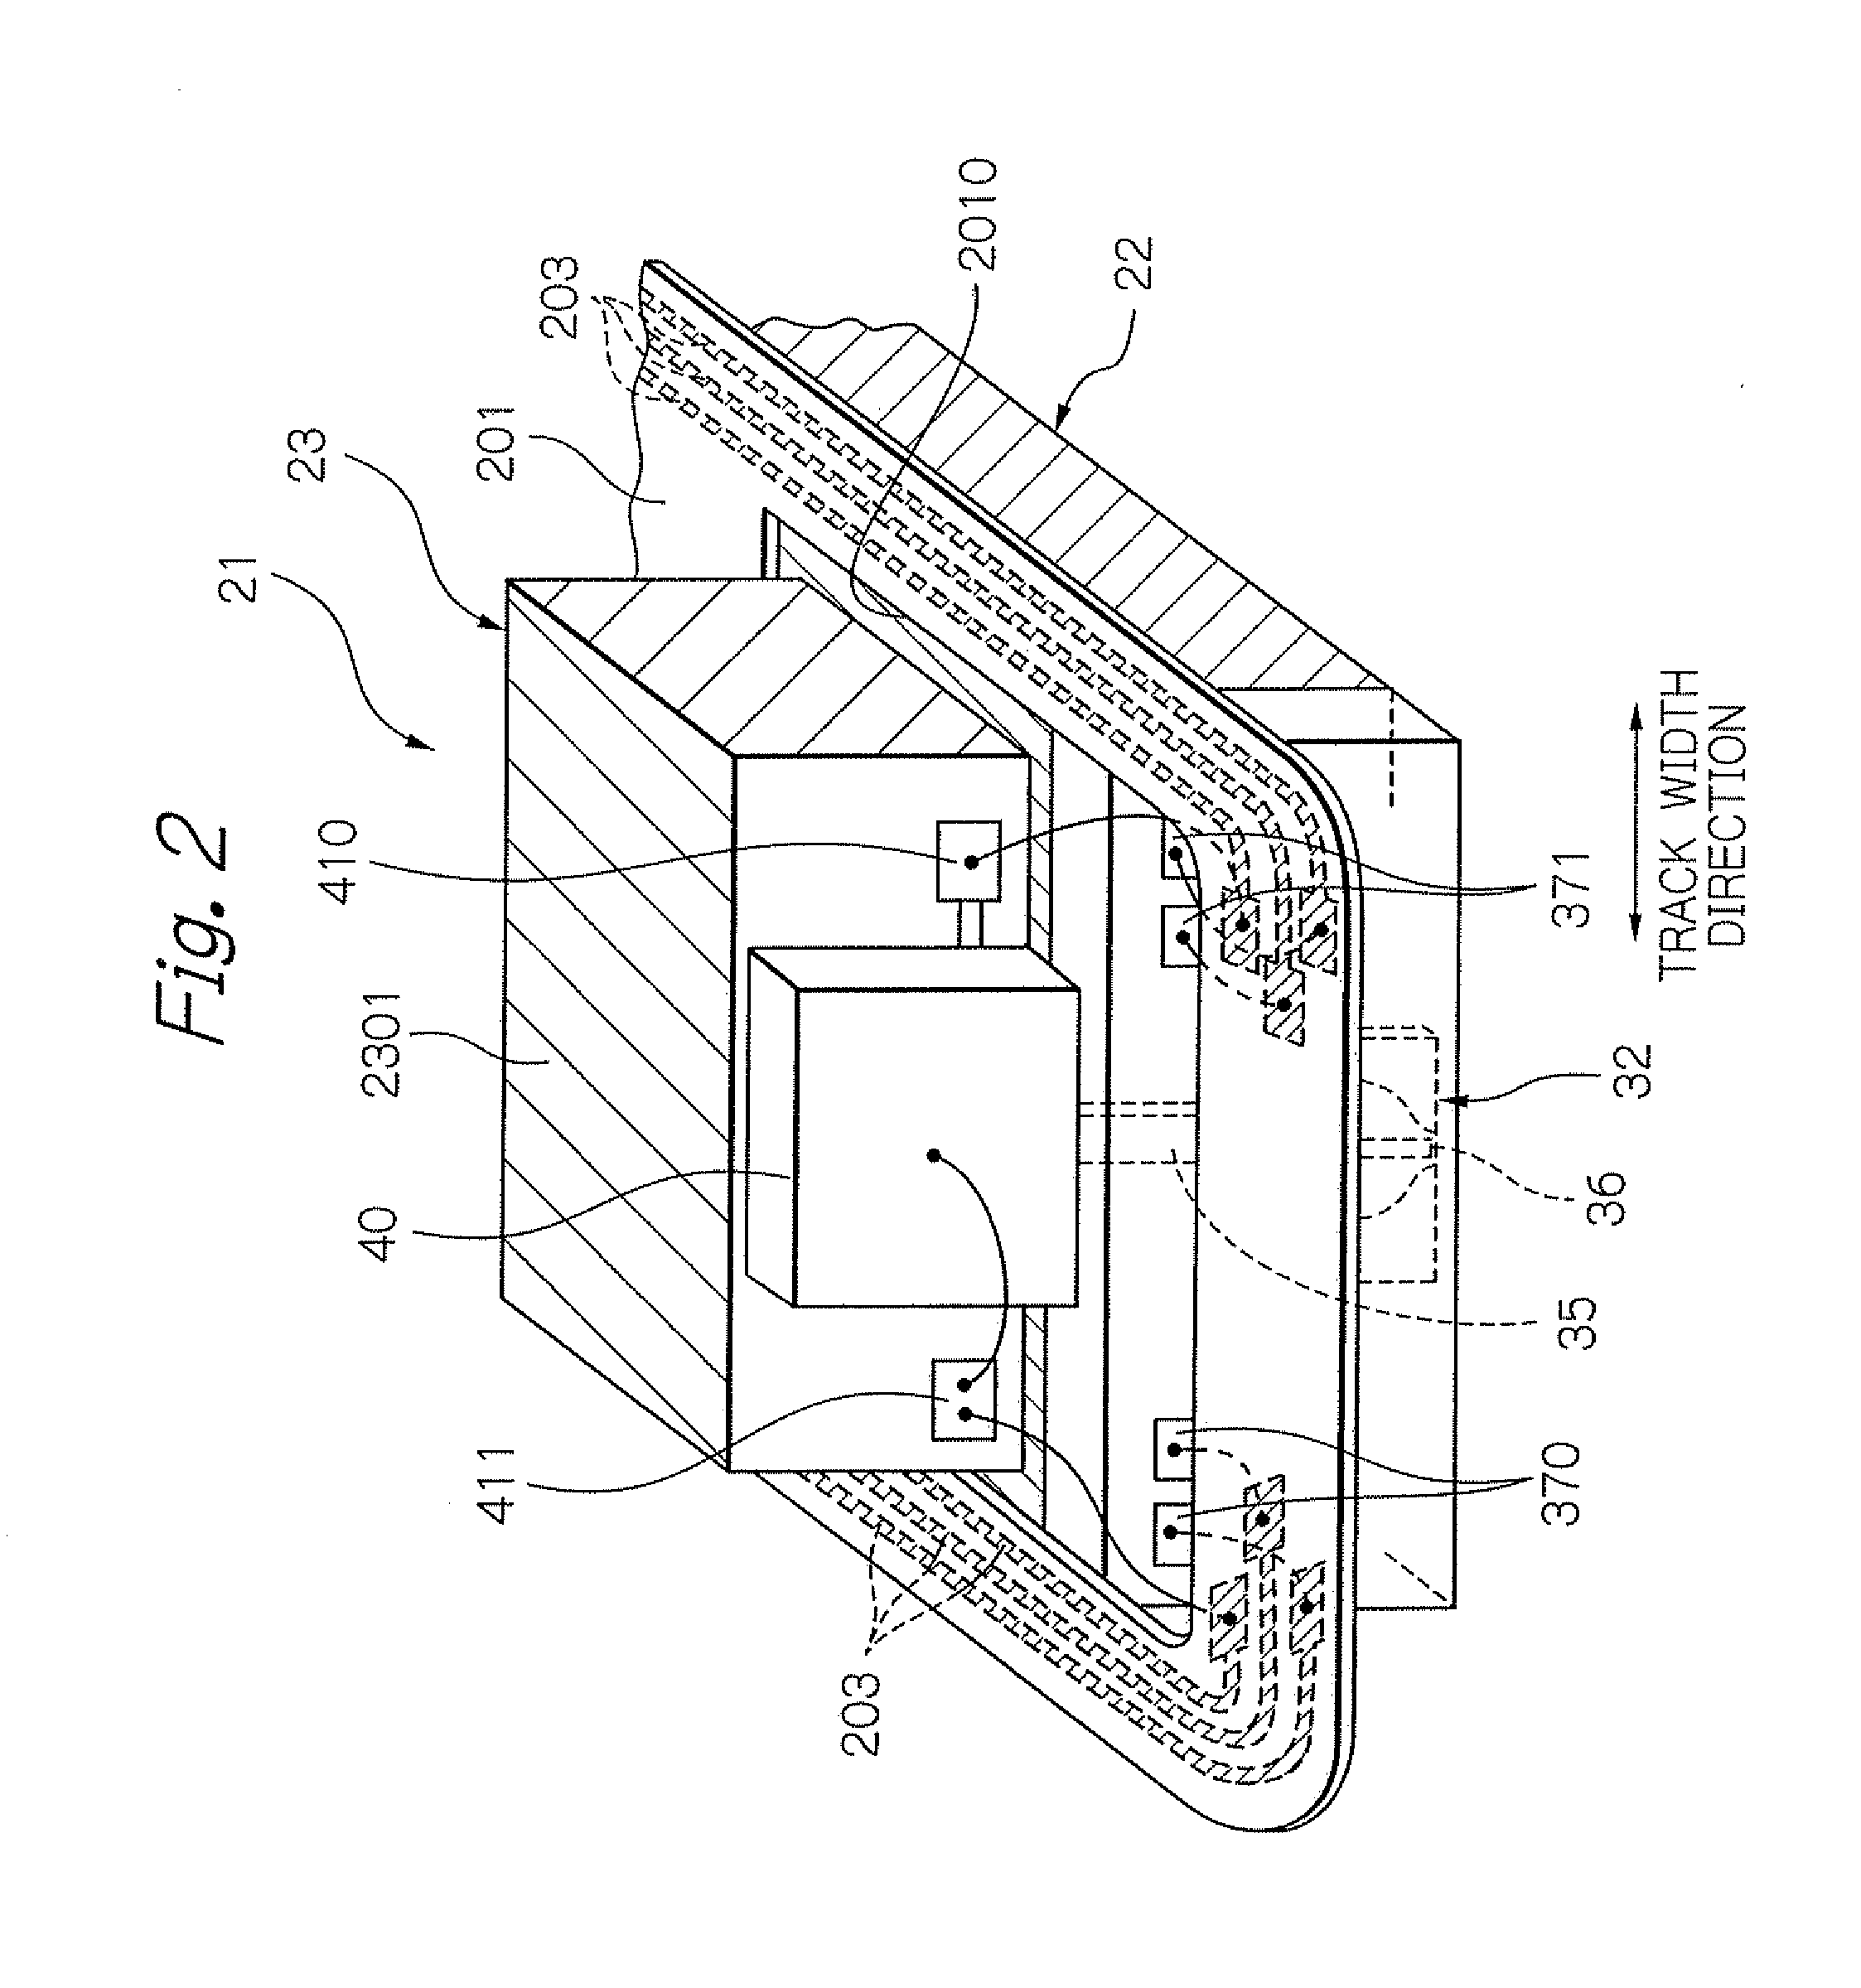 Heat-assisted magnetic recording head constituted of slider and light source unit, and manufacturing method of the head